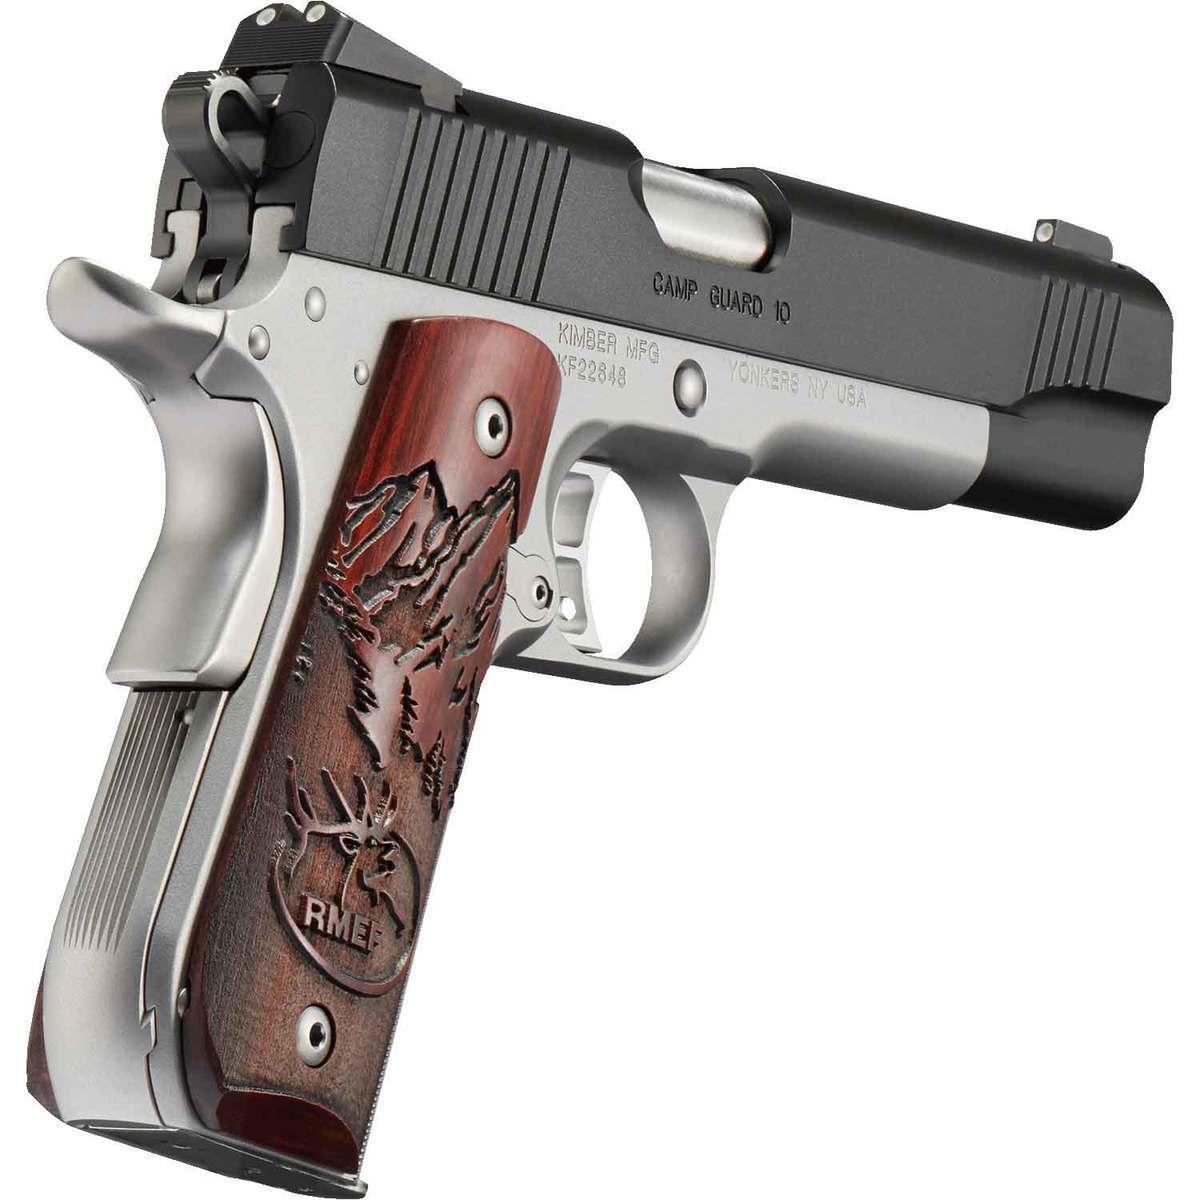 Kimber Camp Guard 10mm Auto 5in Stainless/Black Pistol 8+1 Rounds